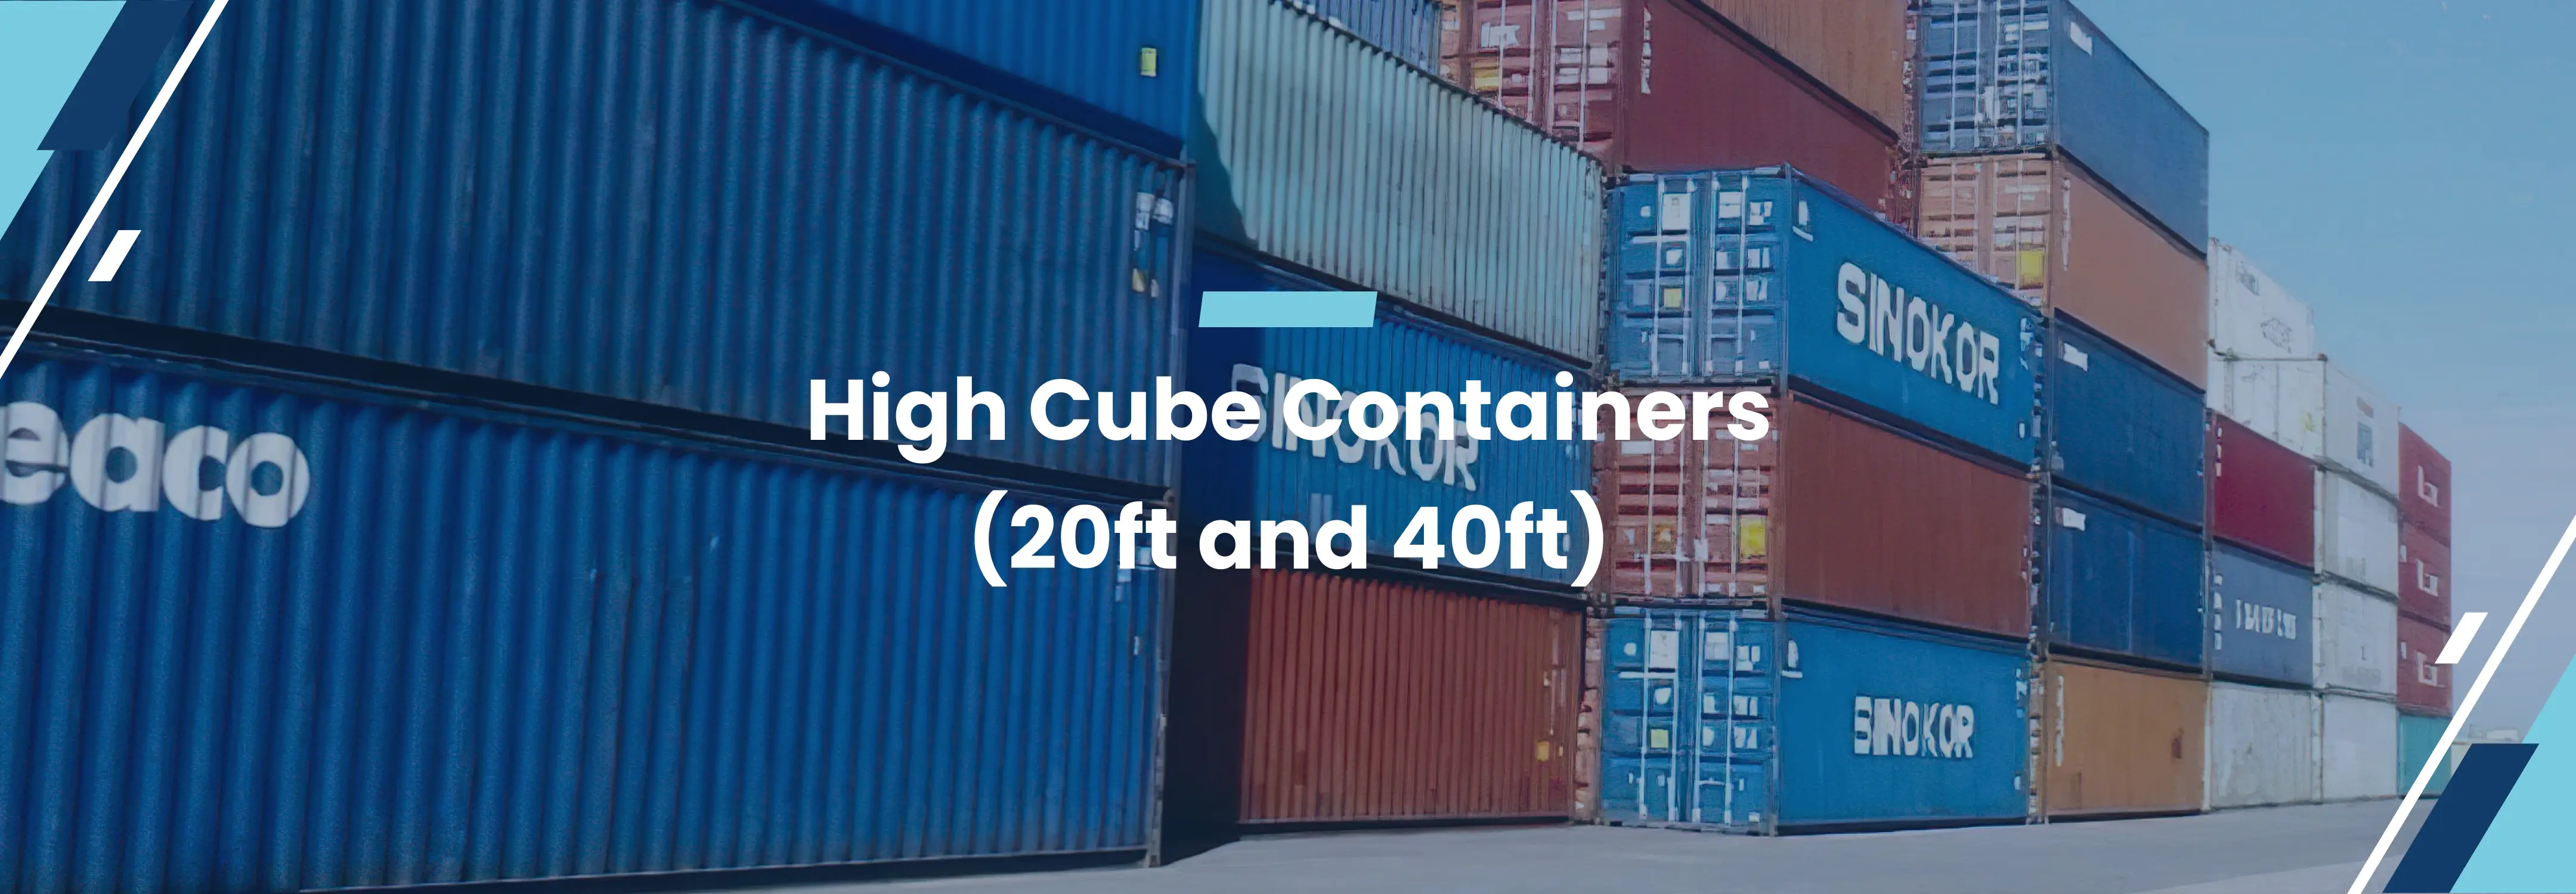 Banner of High Cube Containers